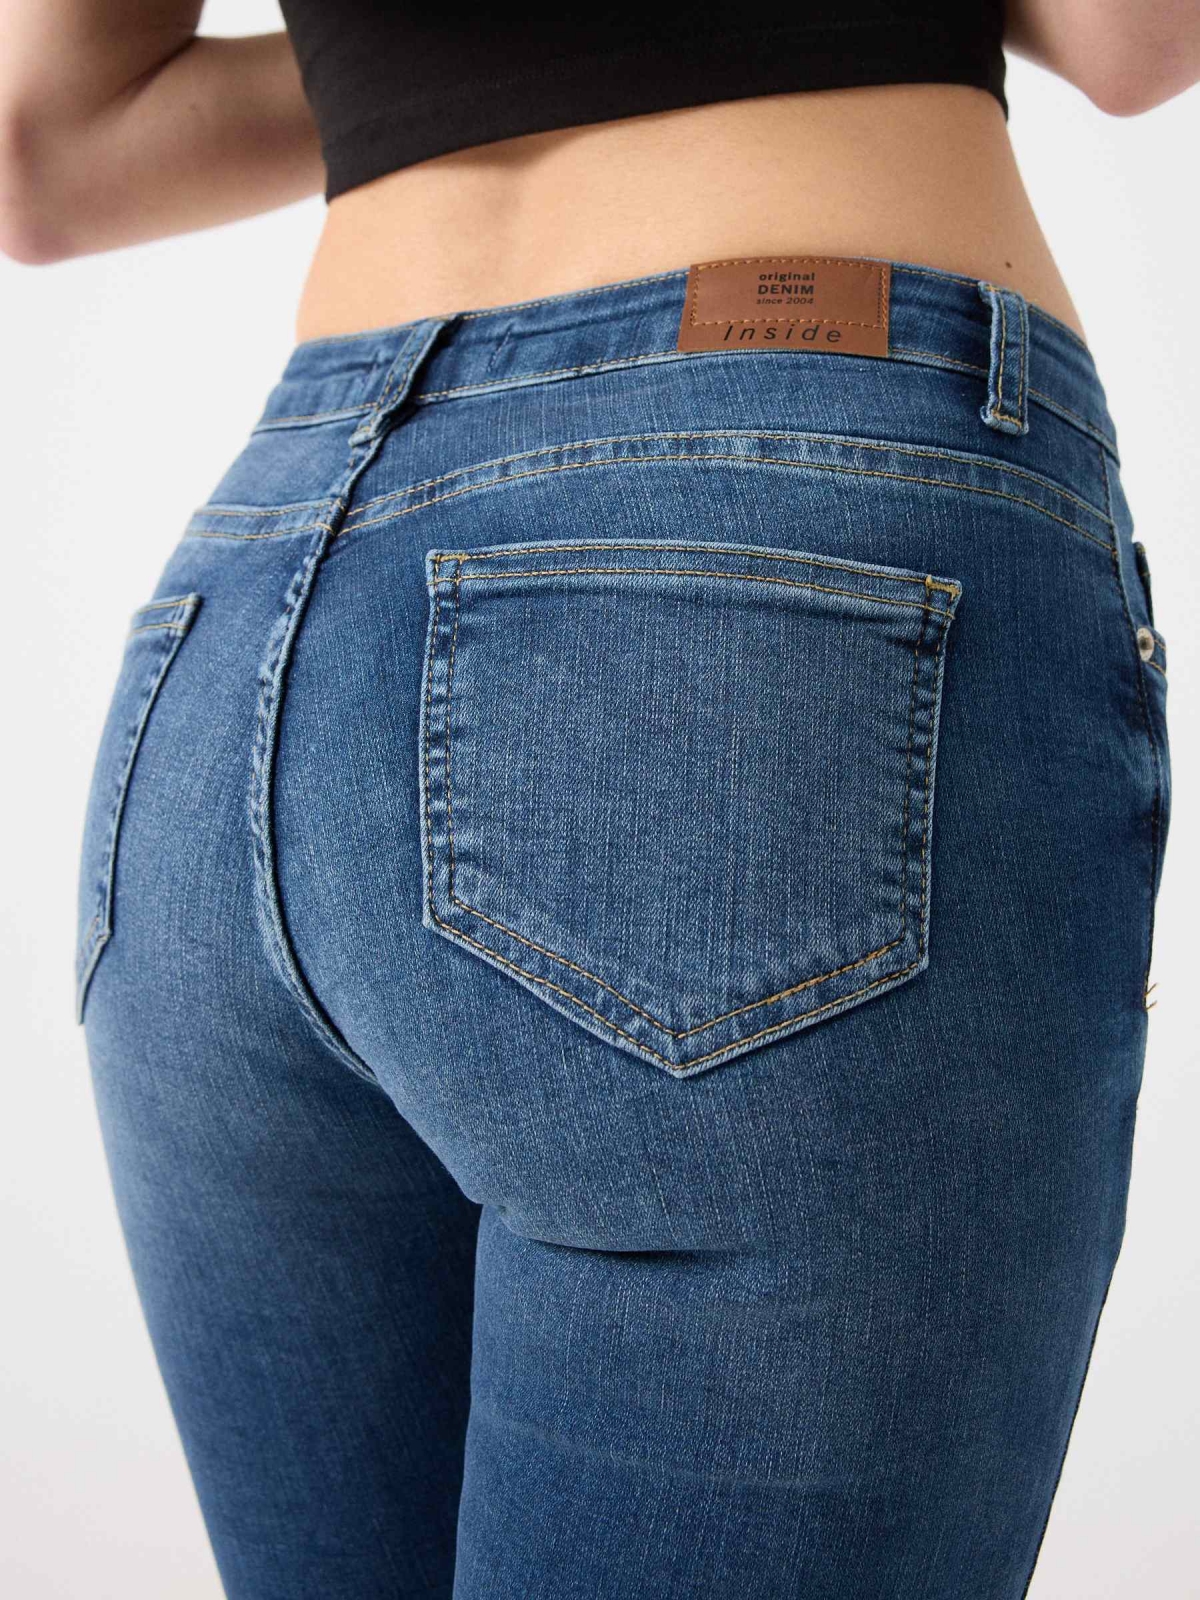 Ripped mid-rise skinny jeans blue detail view